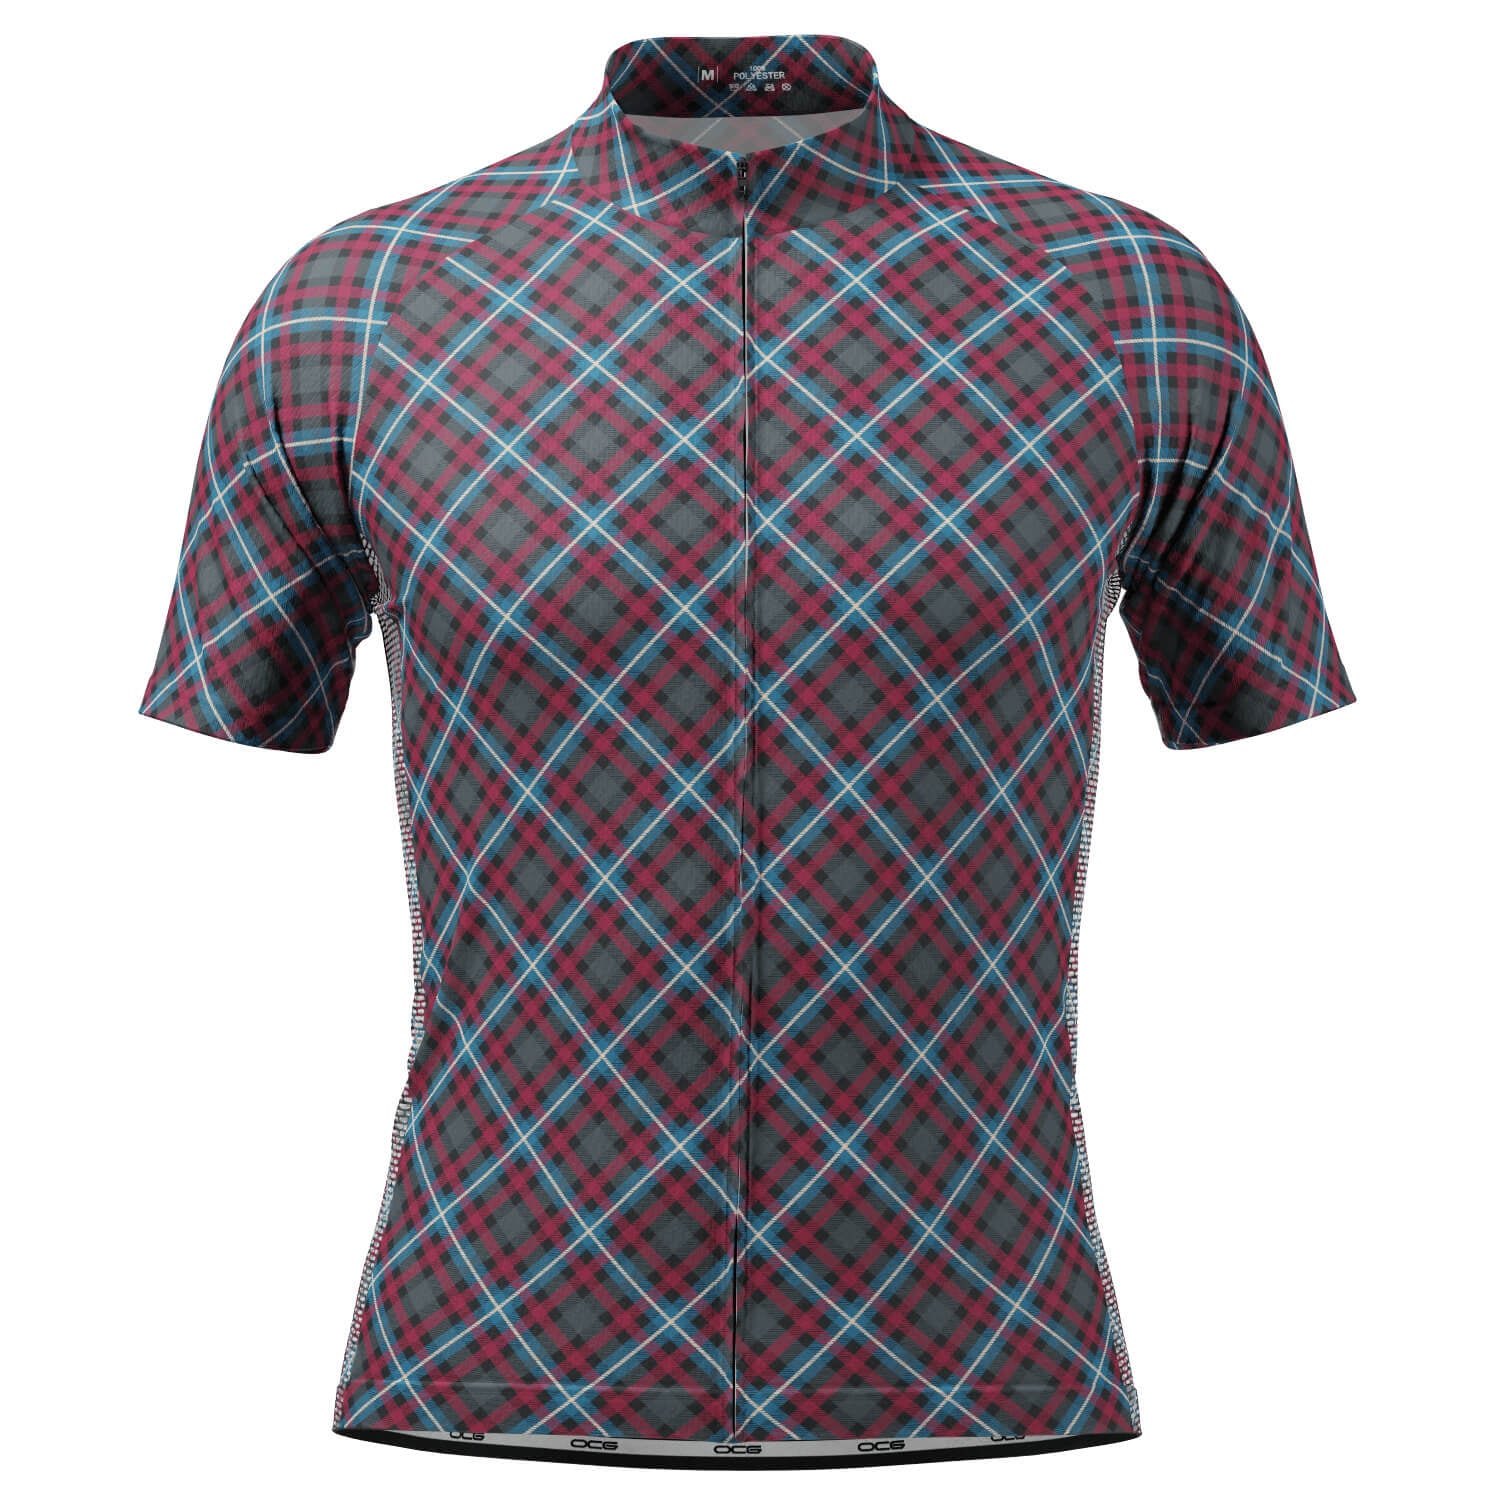 Men's Plaid Tartan Short Sleeve Cycling Jersey only $54.99 - Exclusive ...